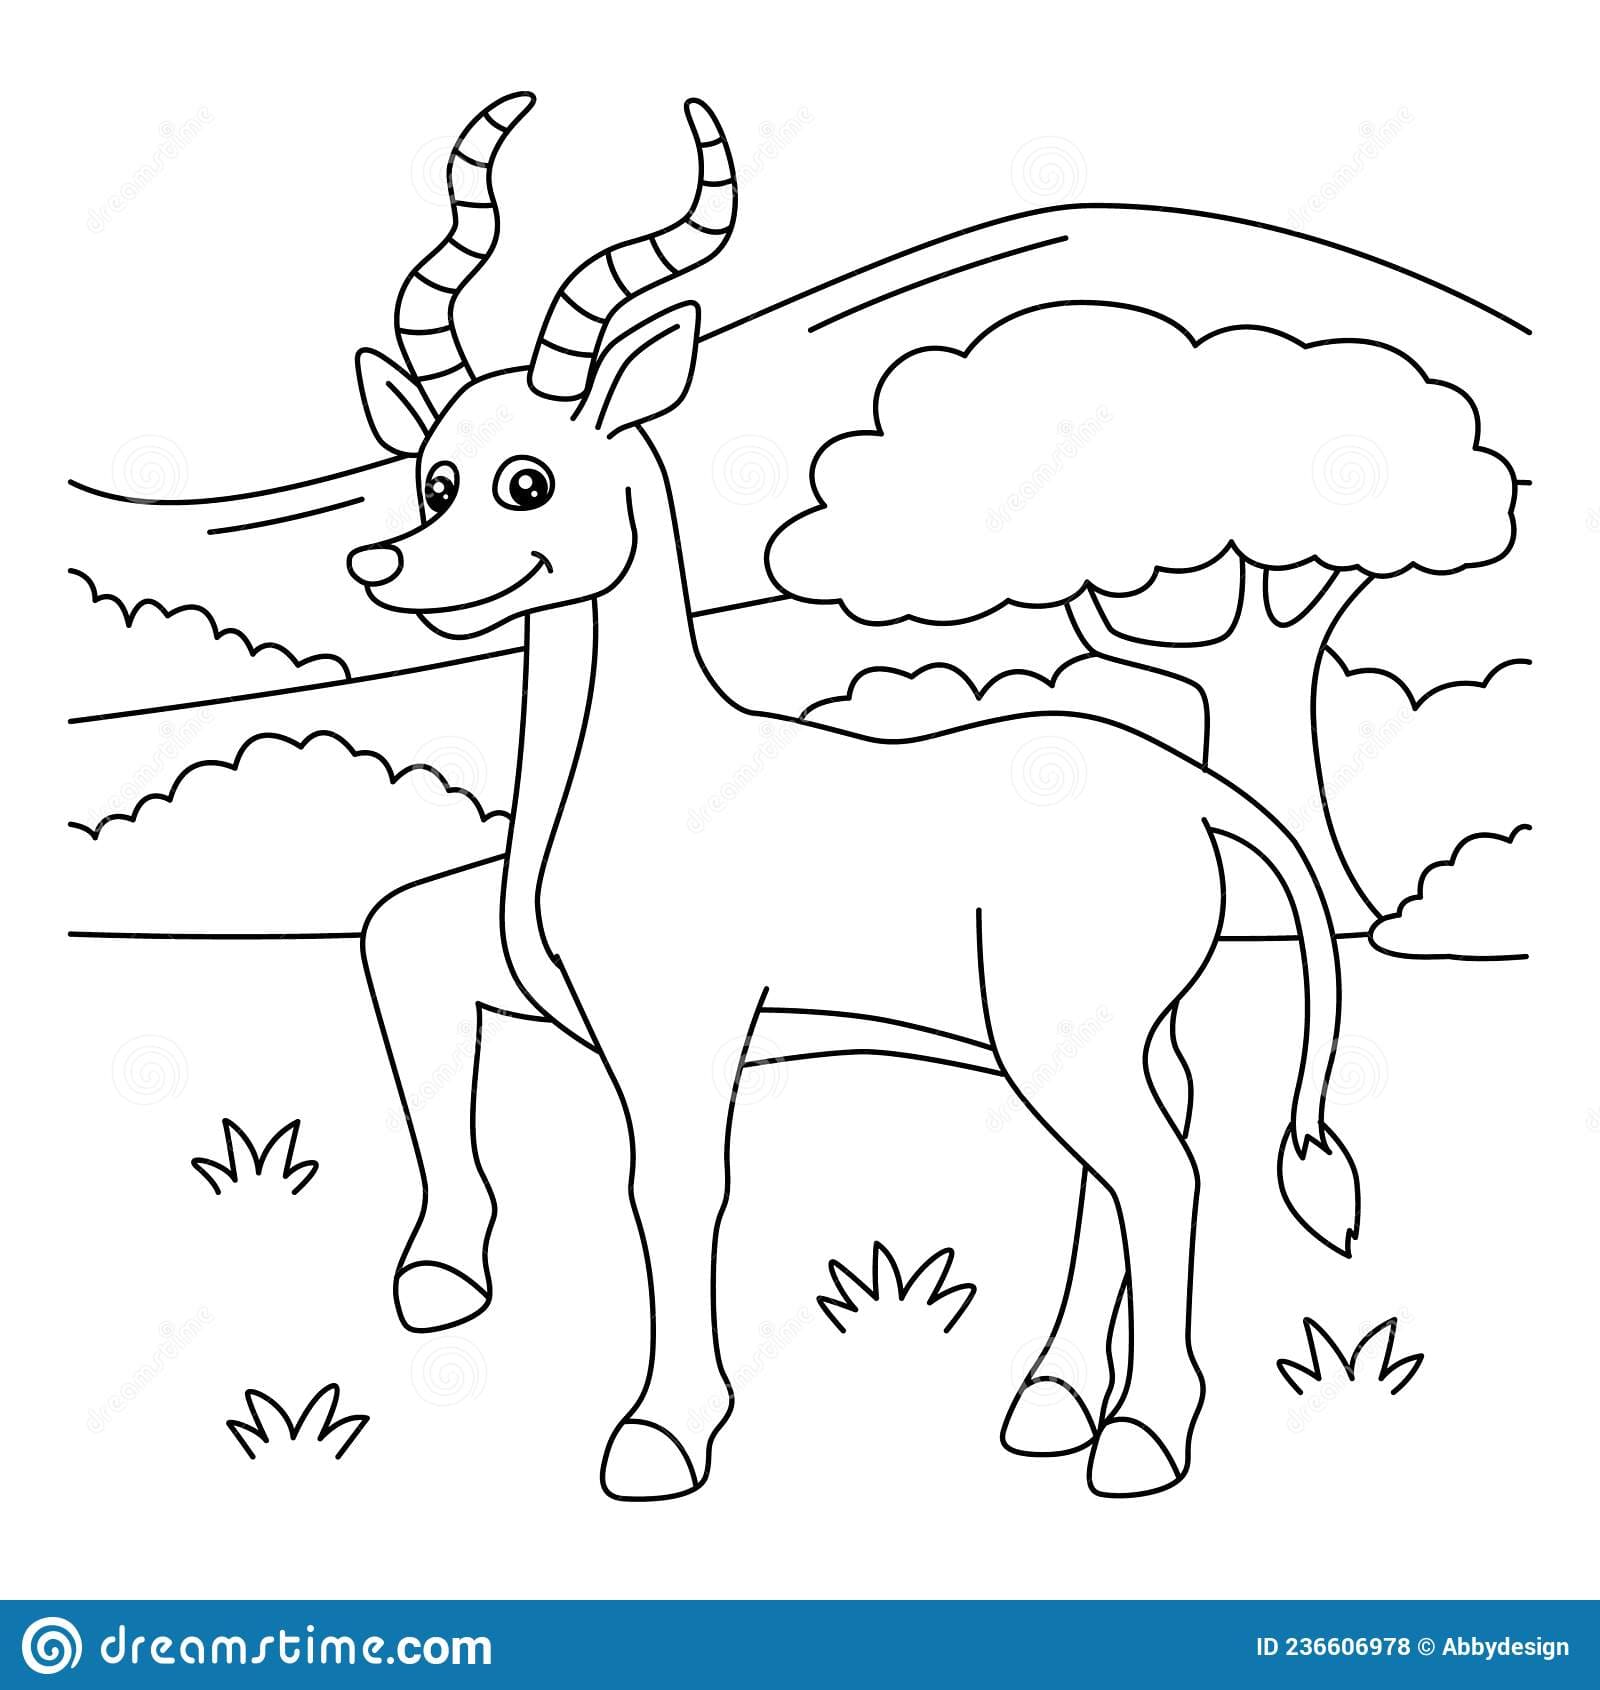 Antelope Coloring Page for Kids Coloring Page